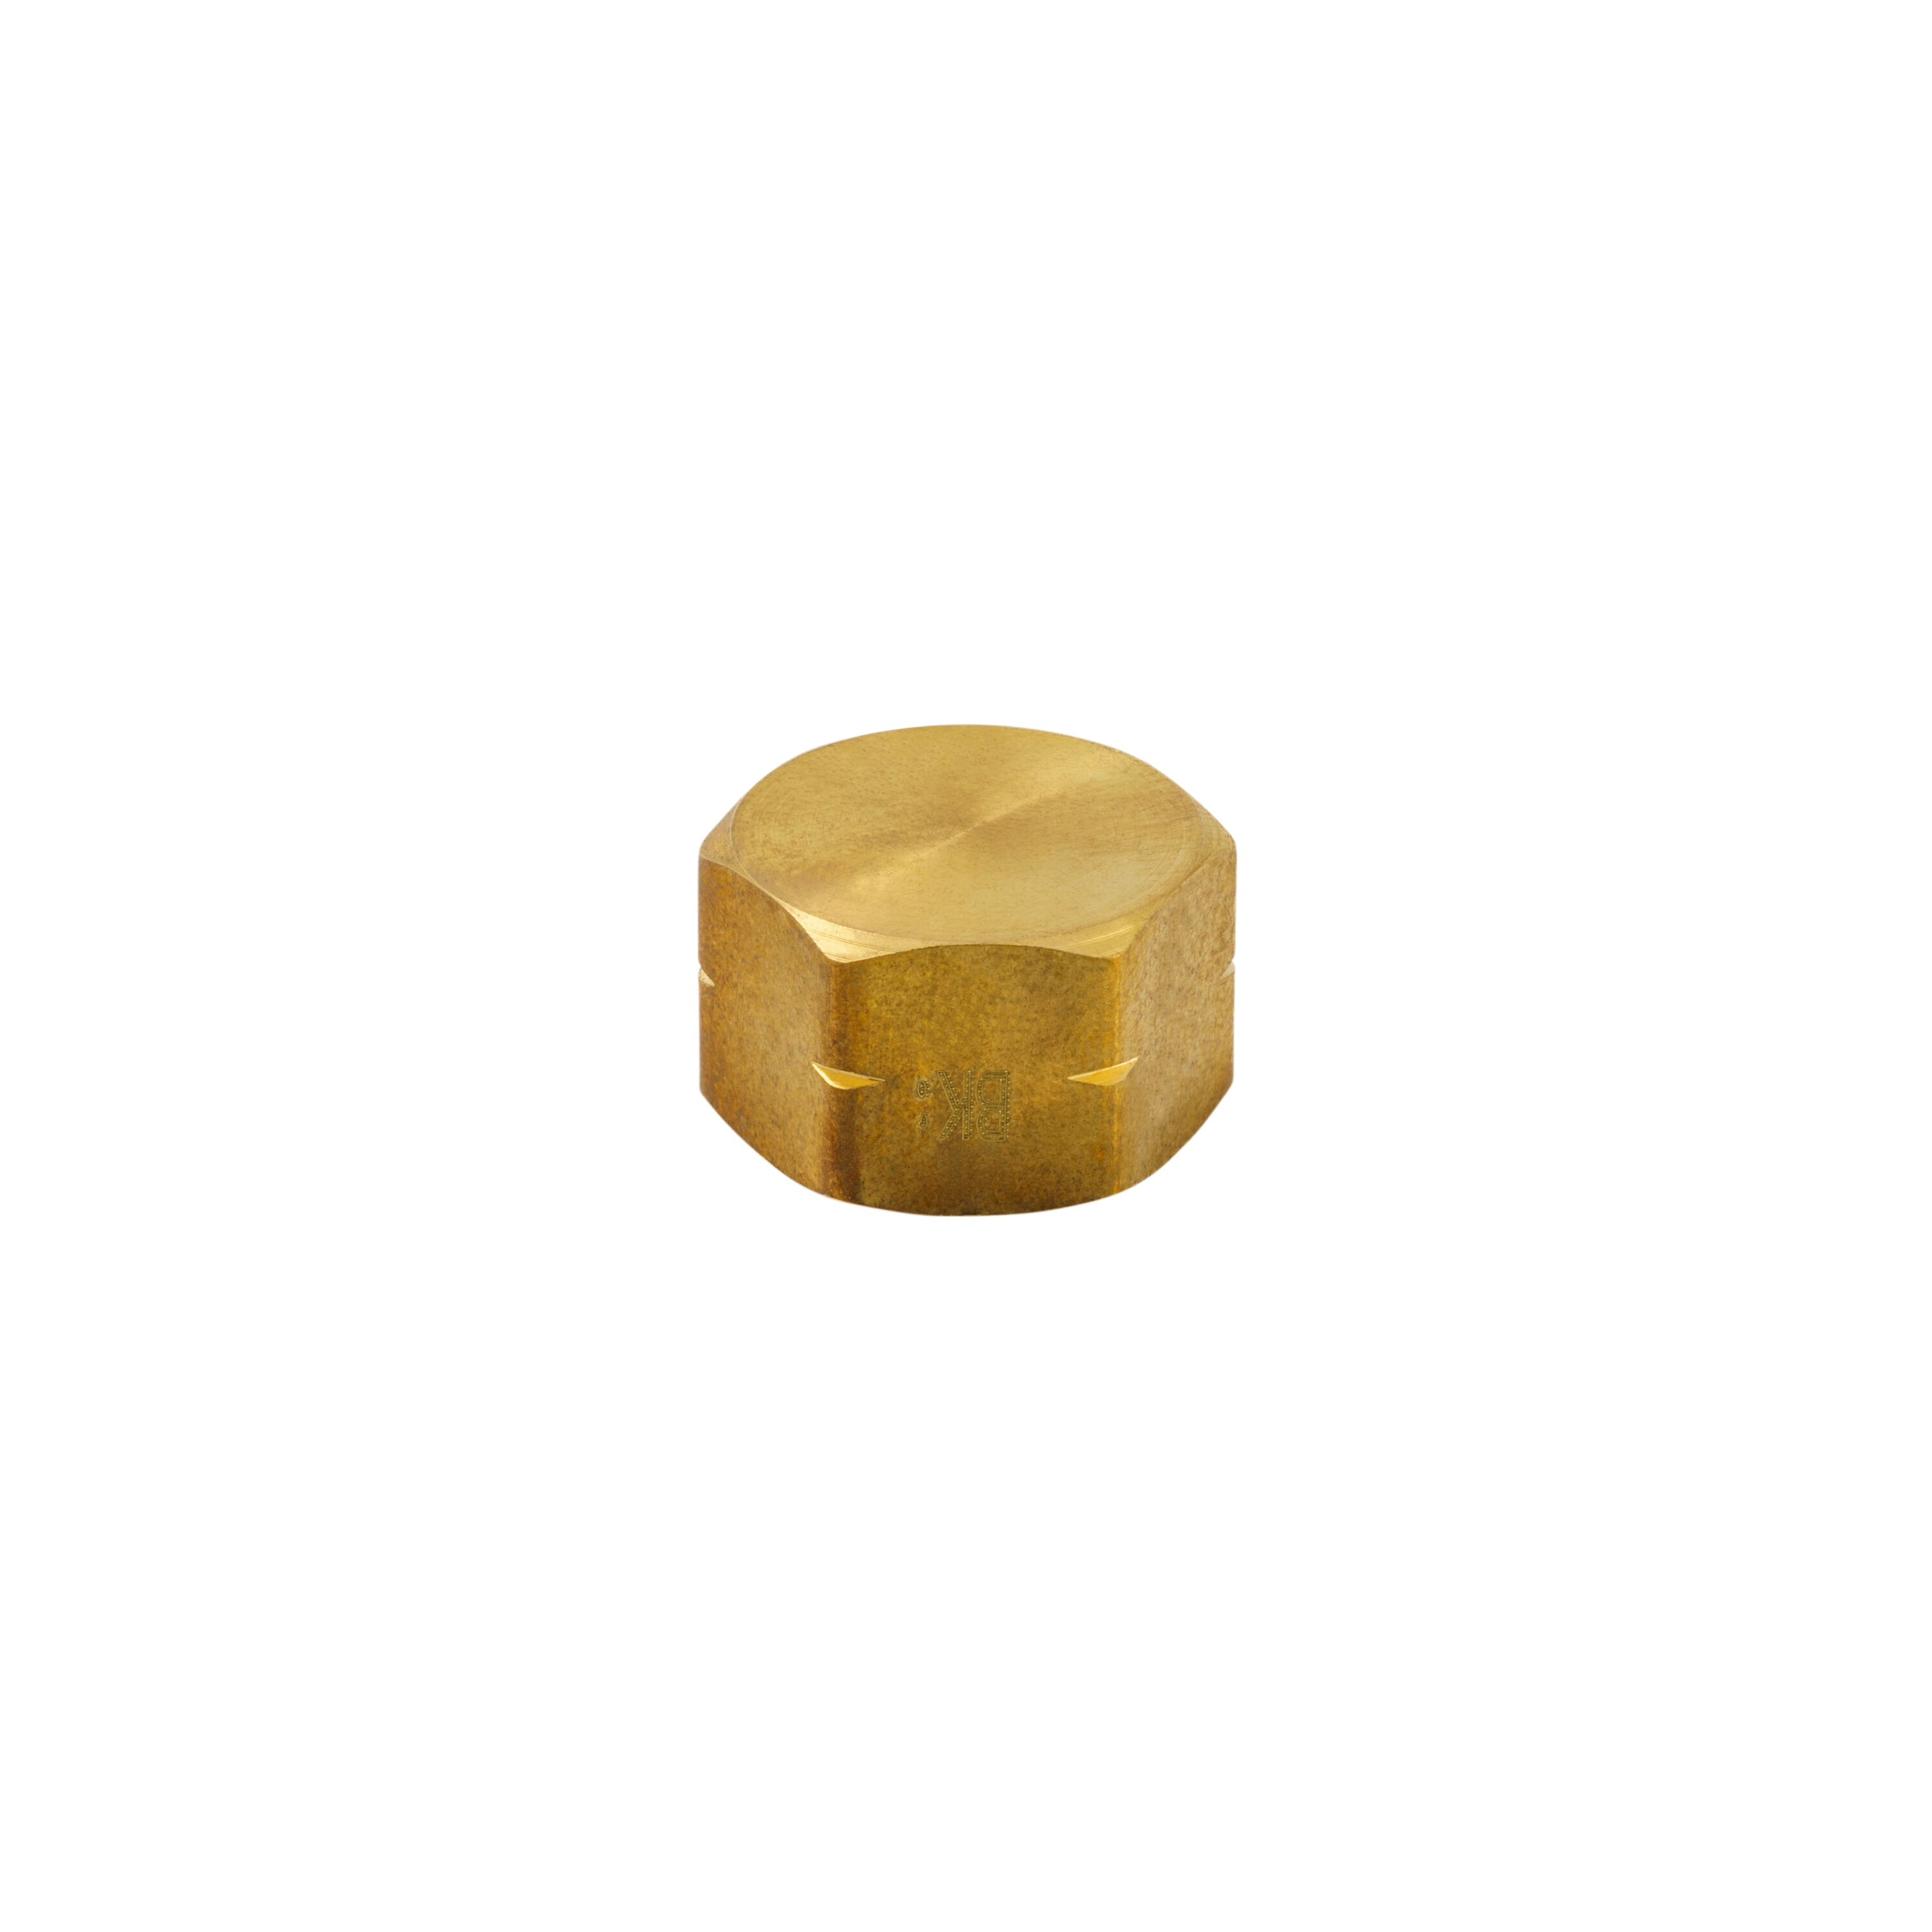 Compression Fitting Blanking Nut Cap Brass Pipe Plumbing Fittings